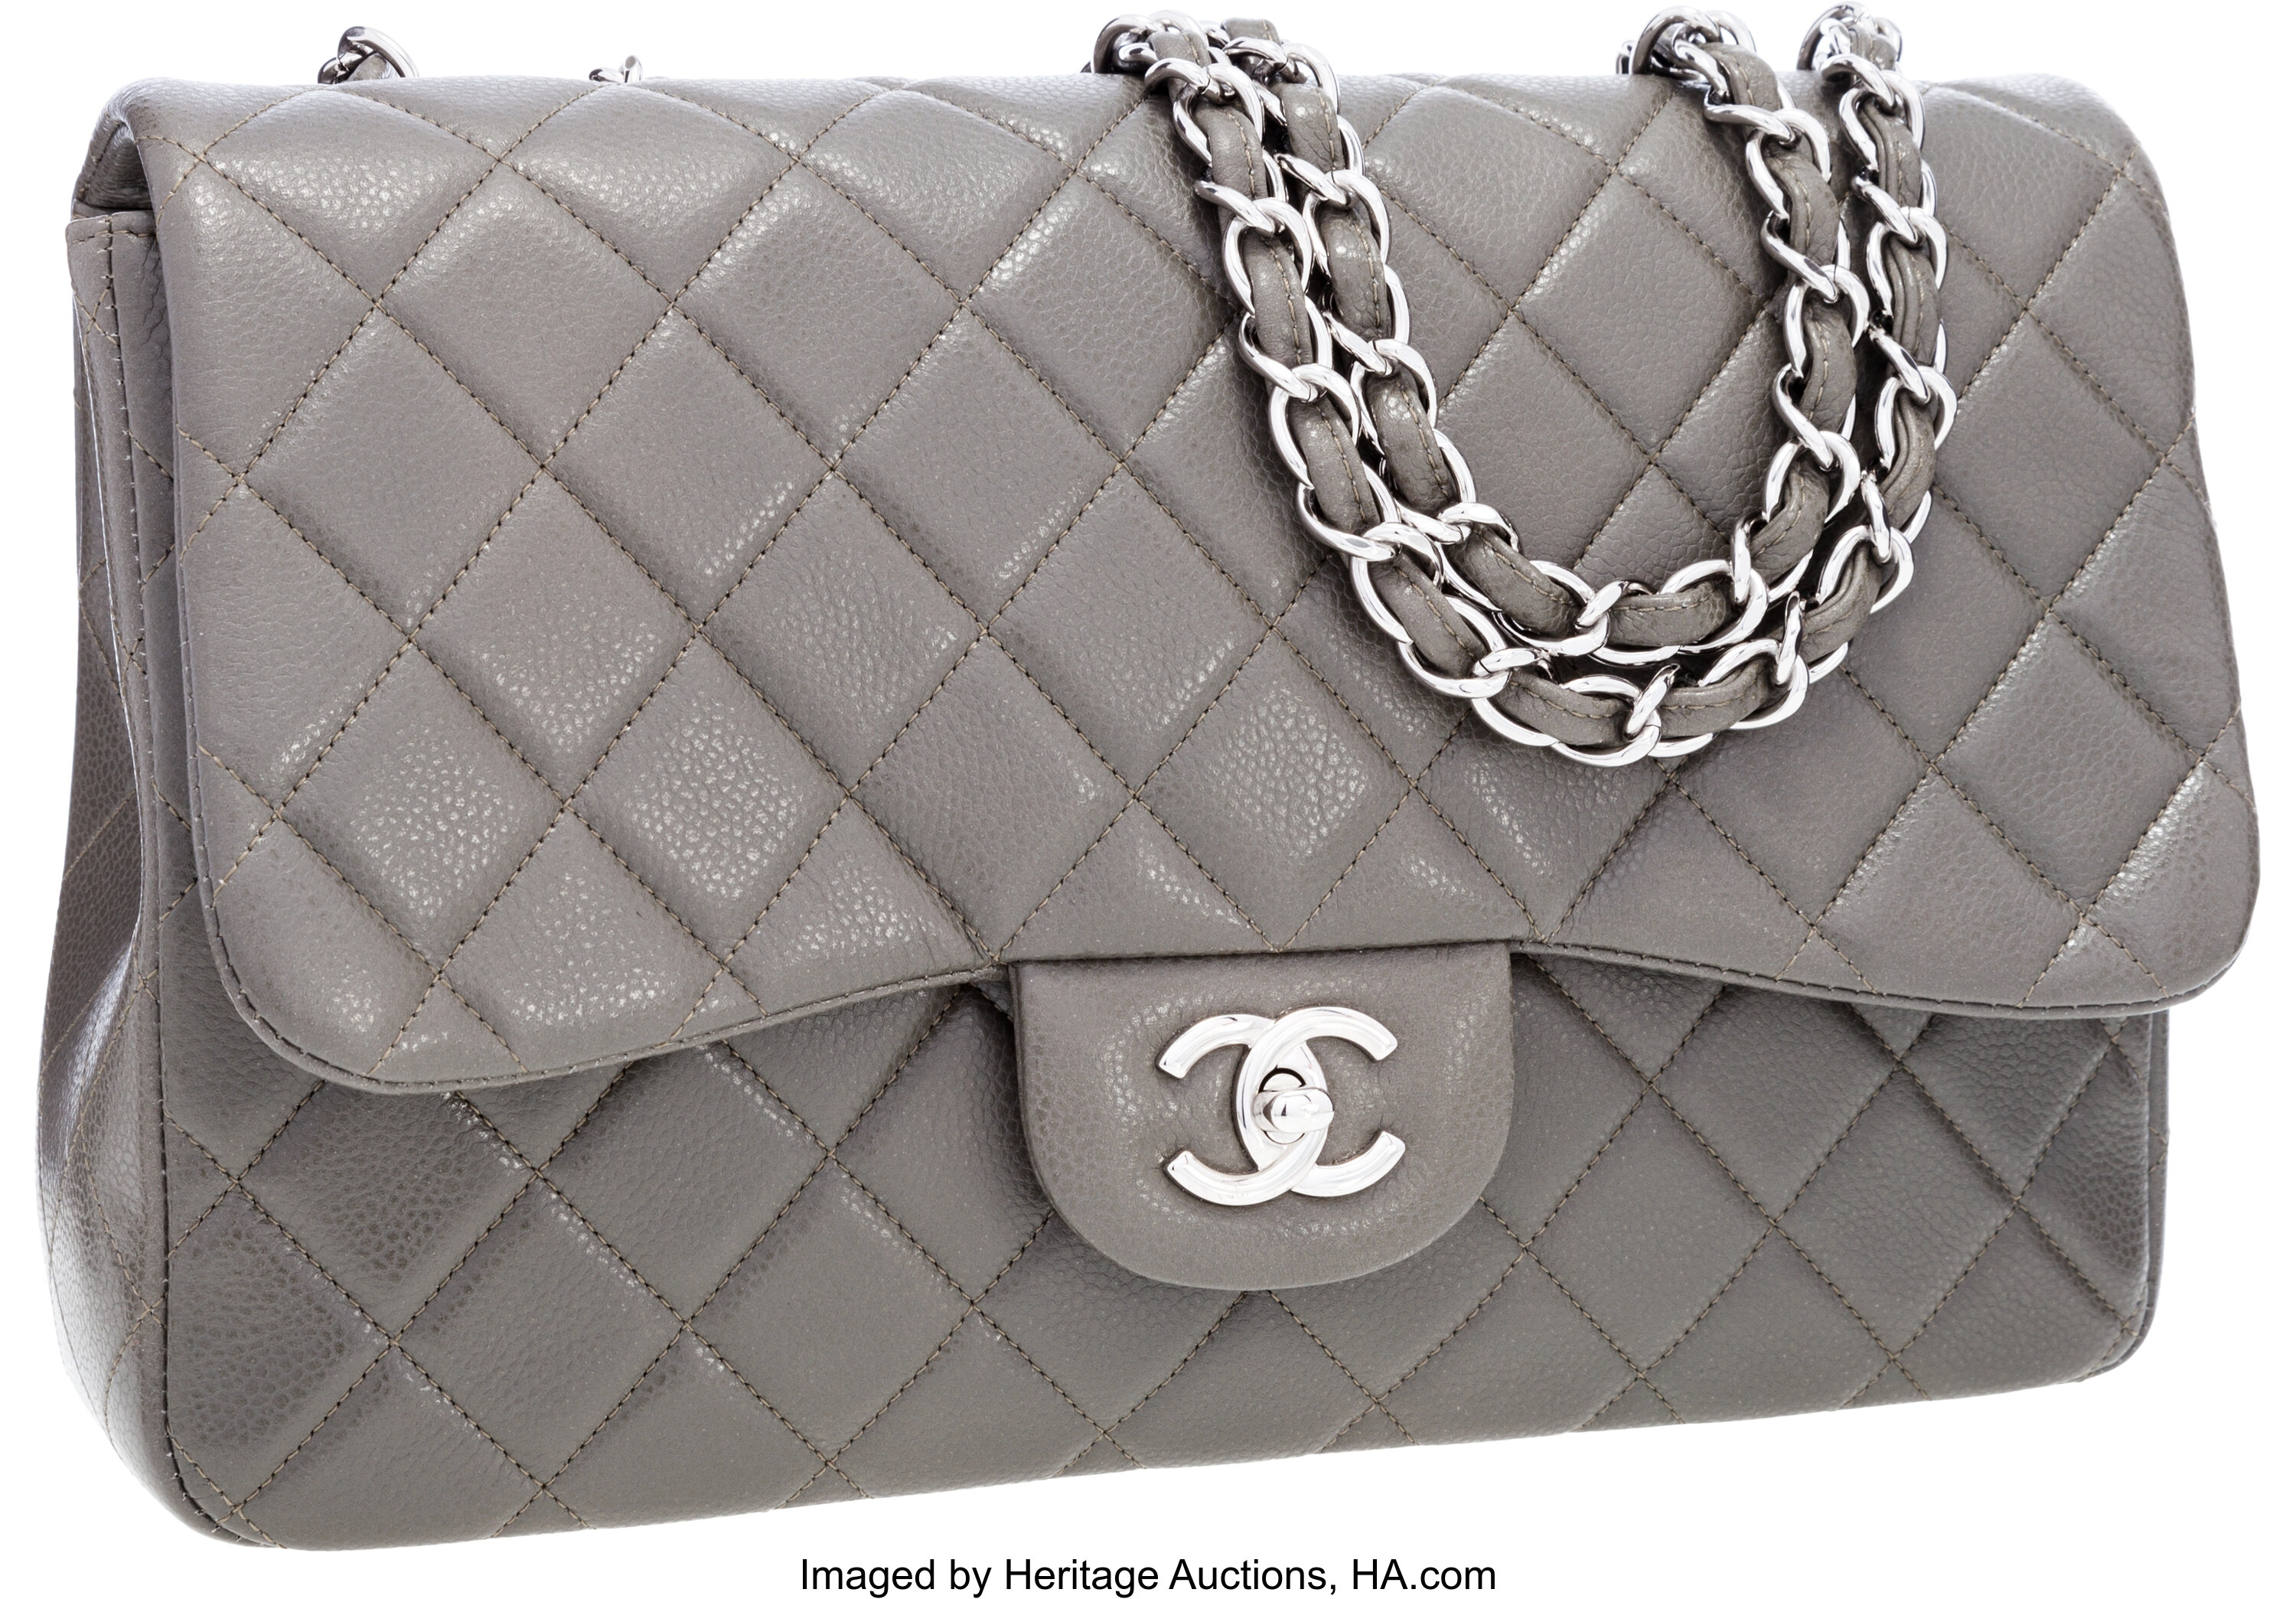 Chanel Gray Quilted Caviar Leather Jumbo Single Flap Bag with